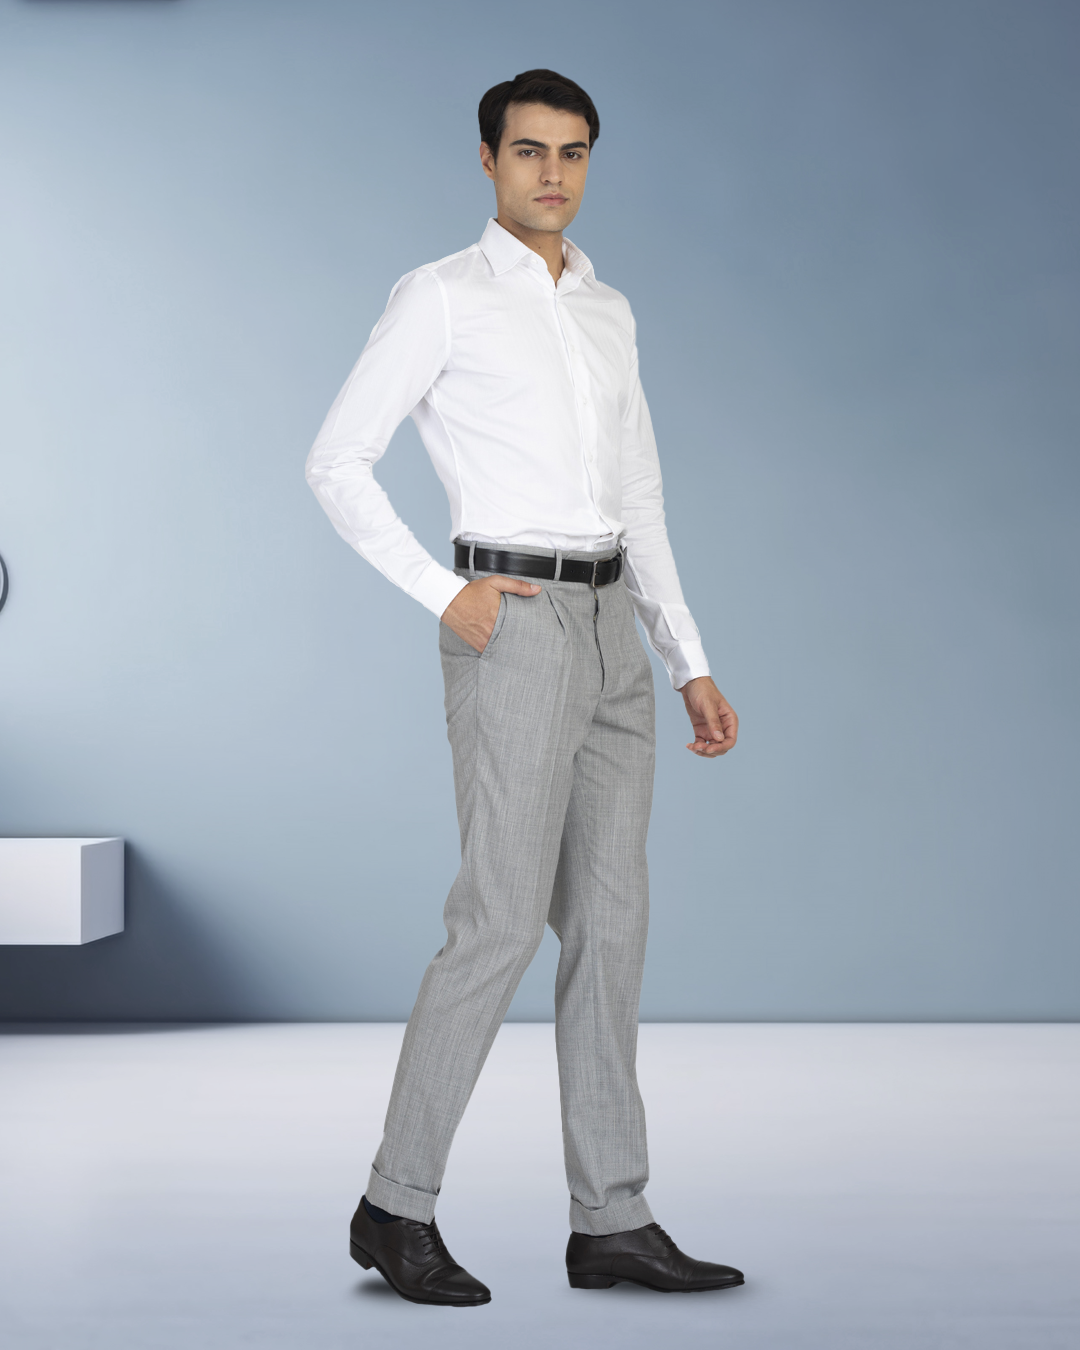 PERFECT PANTS - Style Clinic